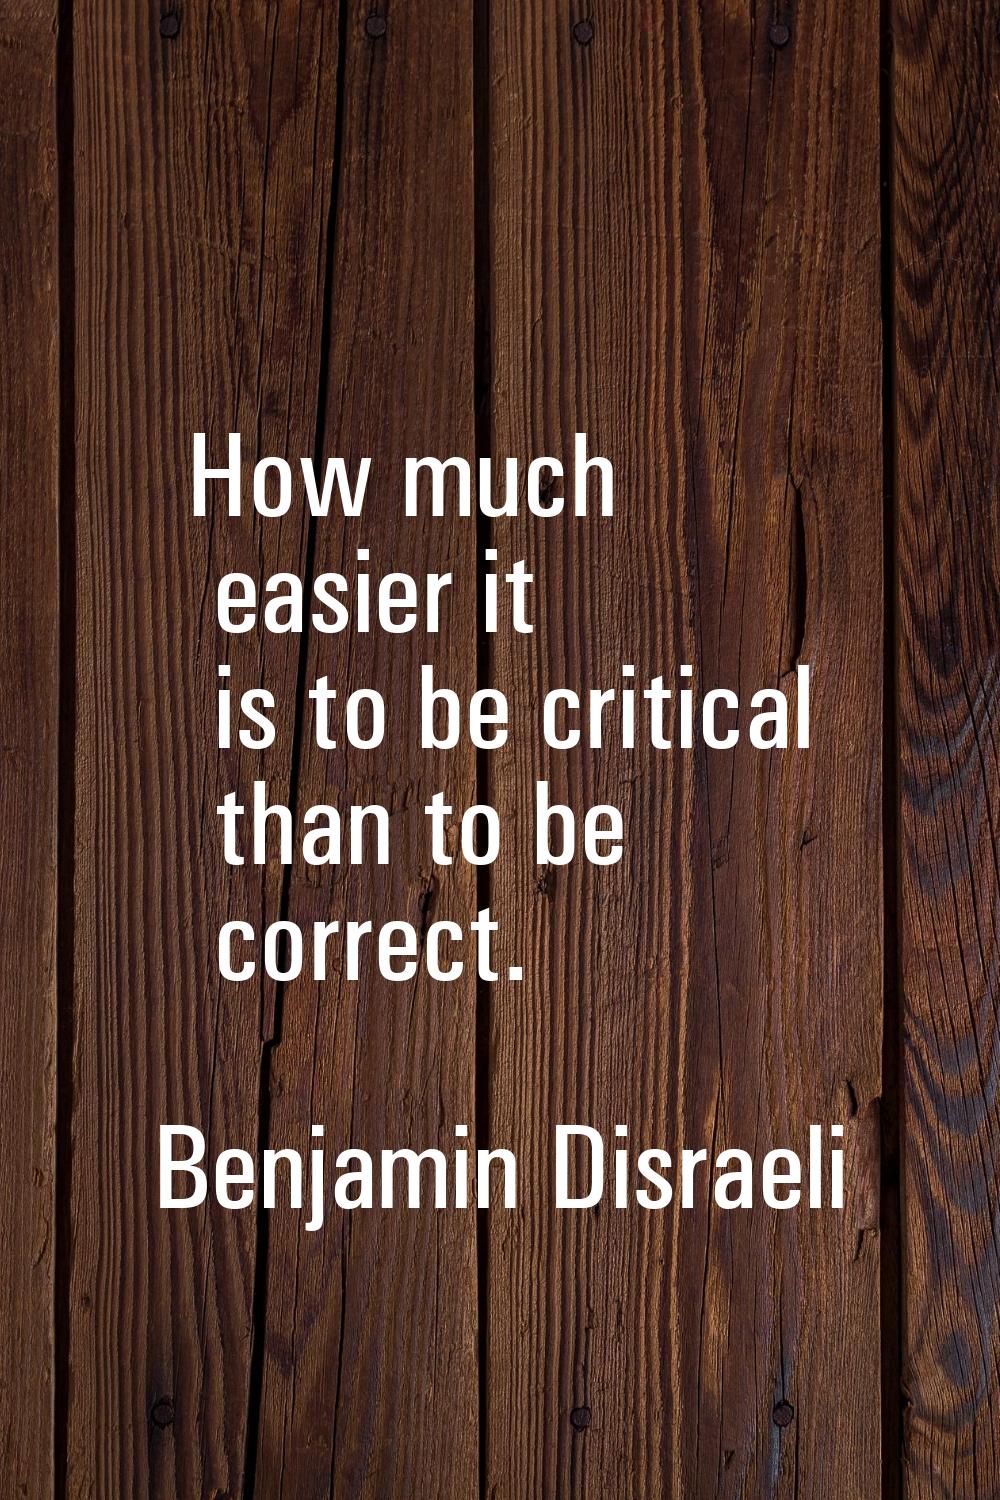 How much easier it is to be critical than to be correct.